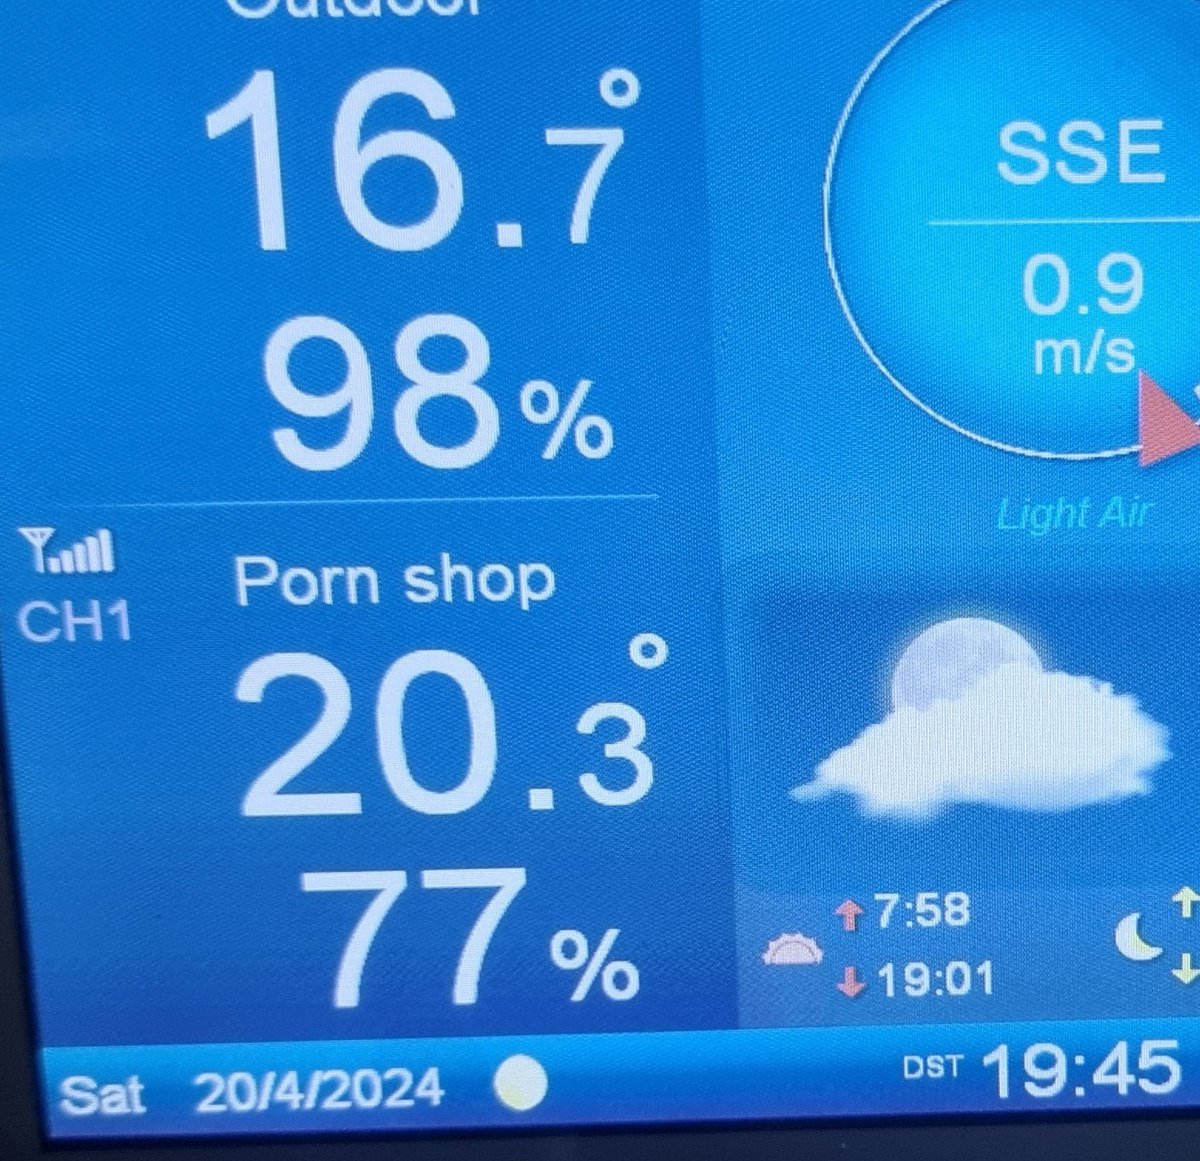 Father in law asked me for some help with his home weather station. I decided the master bedroom sensor needed some urgent calibration...how long till he notices? 👀🤣